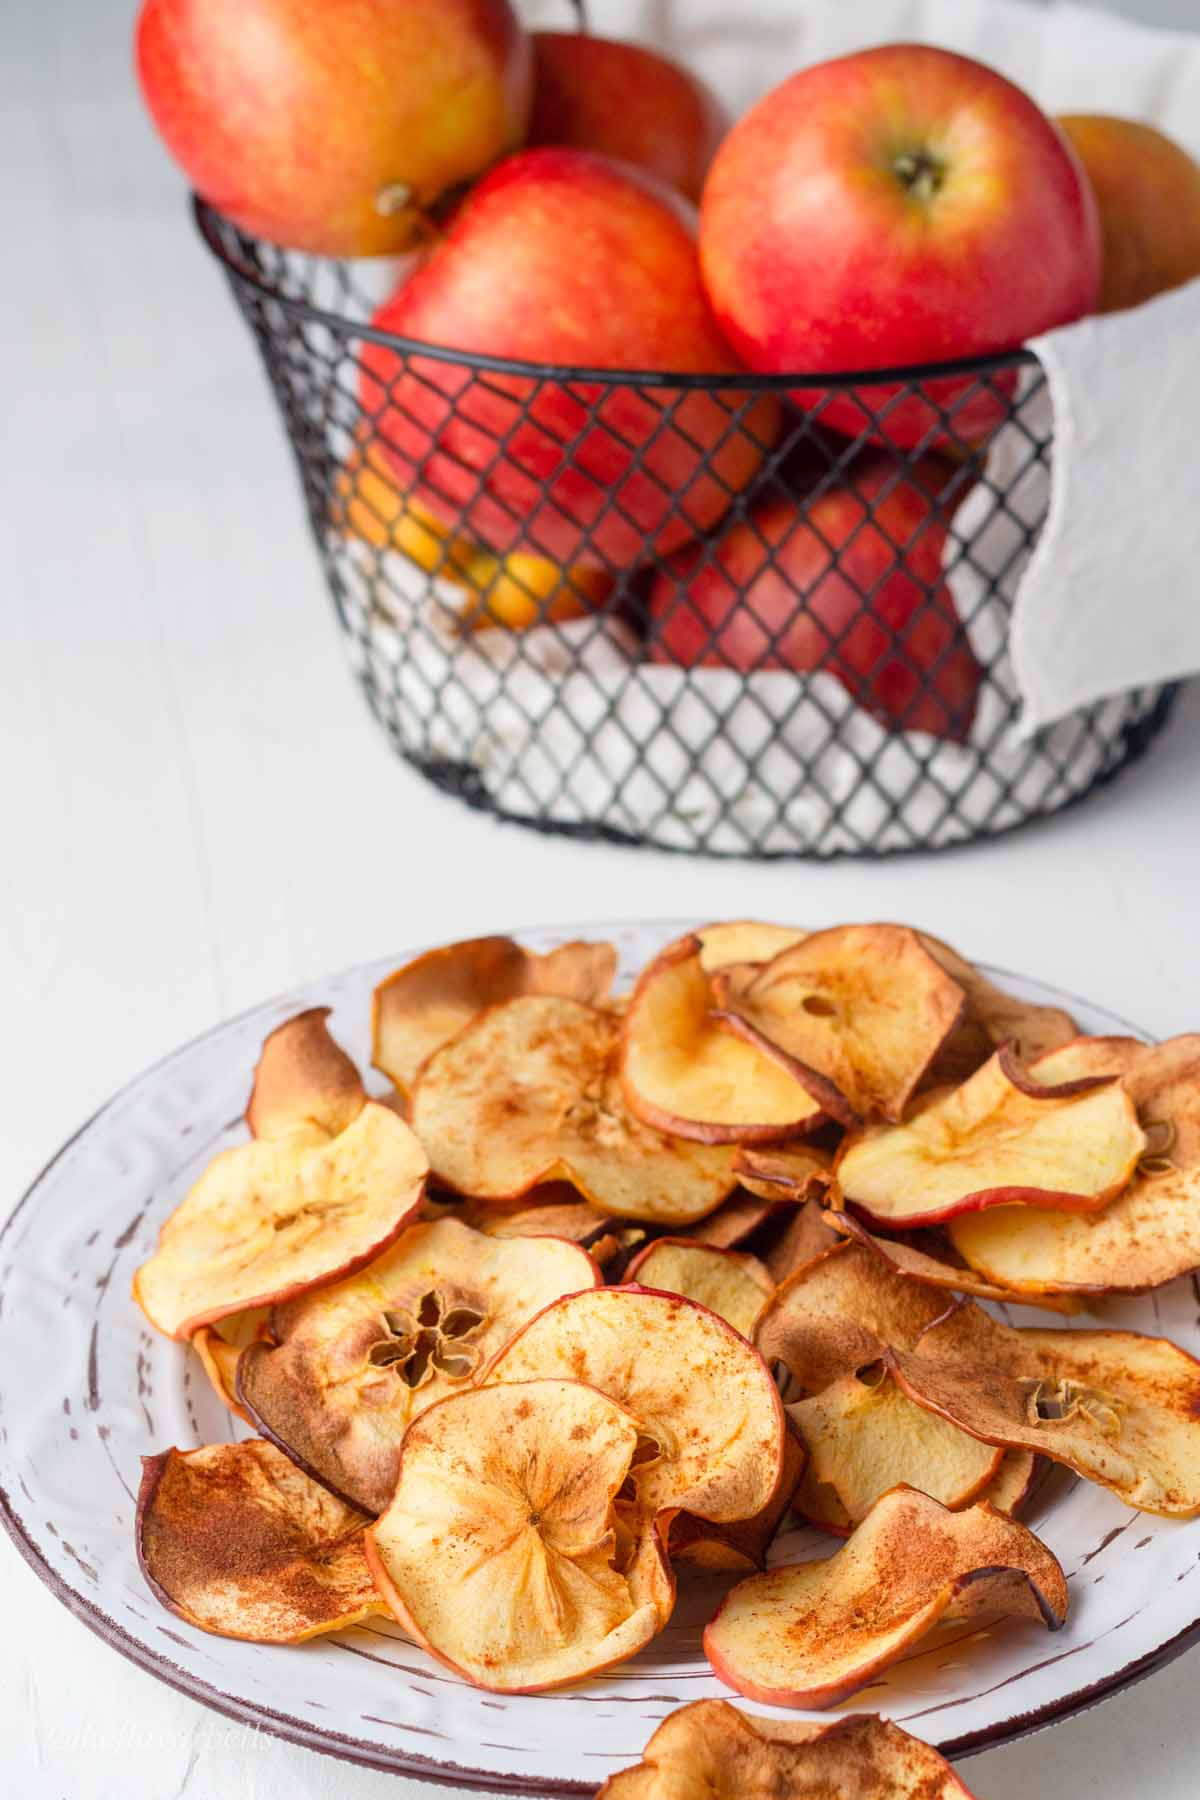 dehydrated apples in a plate